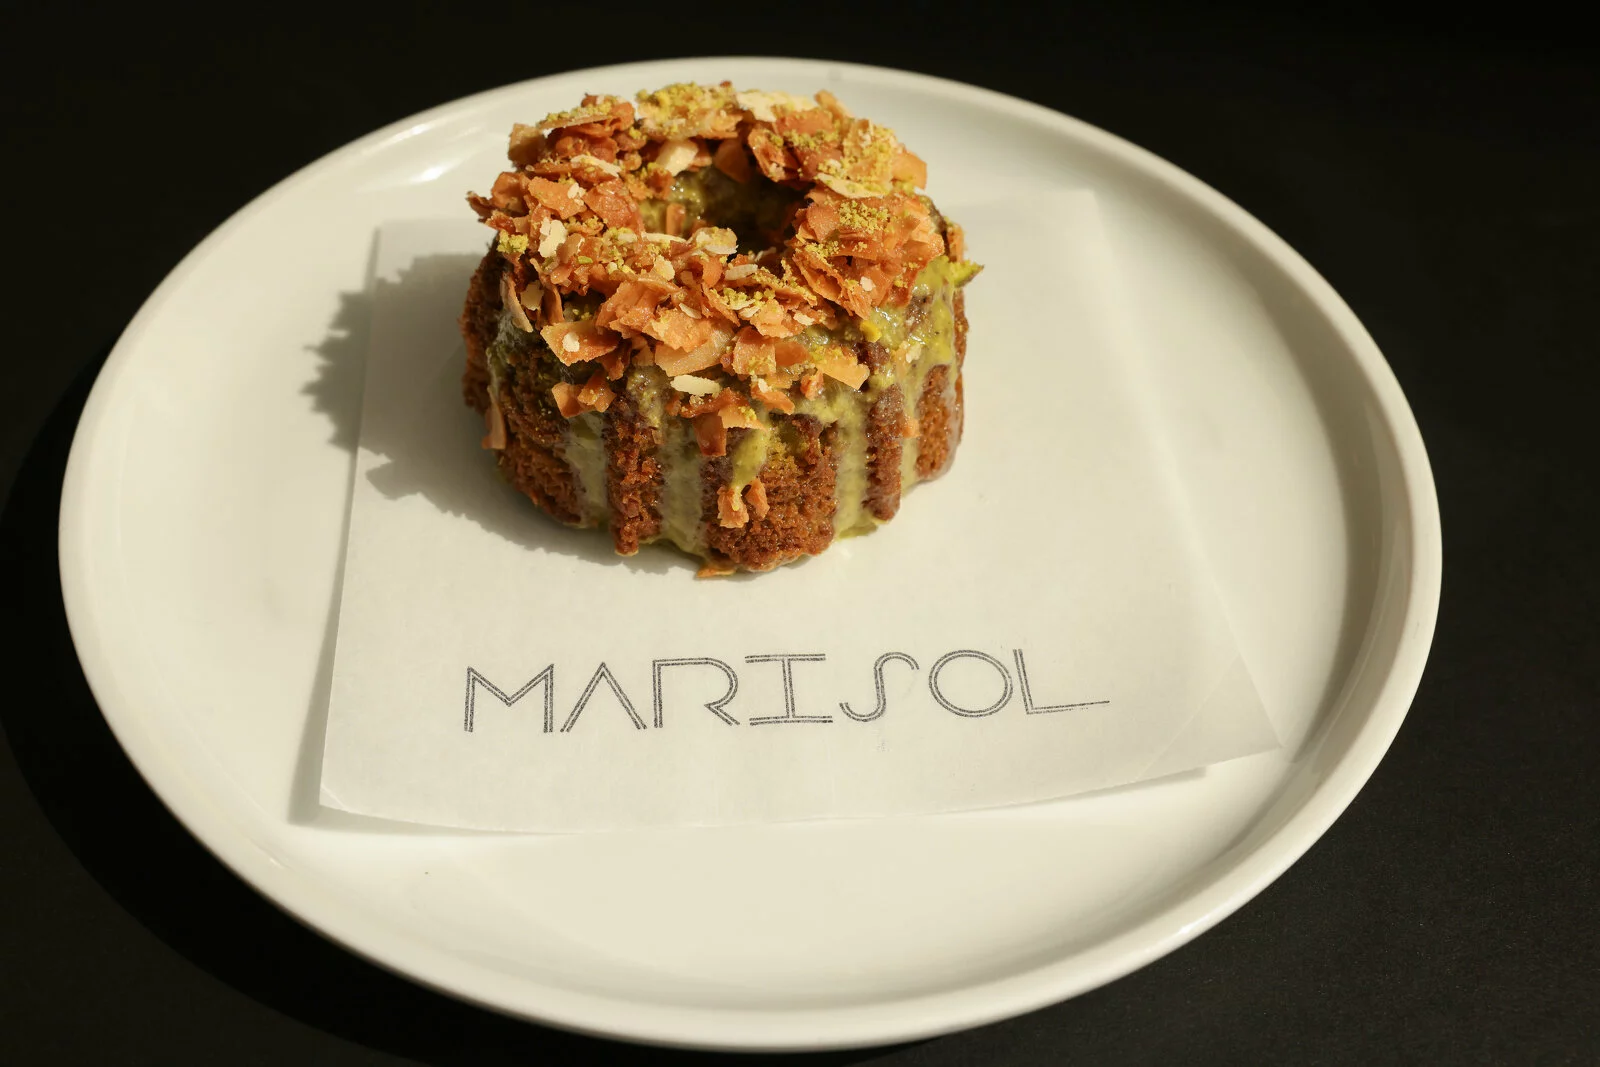 A beautiful, round pastry sits on a parchment paper marked with the word Marisol on top of a white plate against a black background.